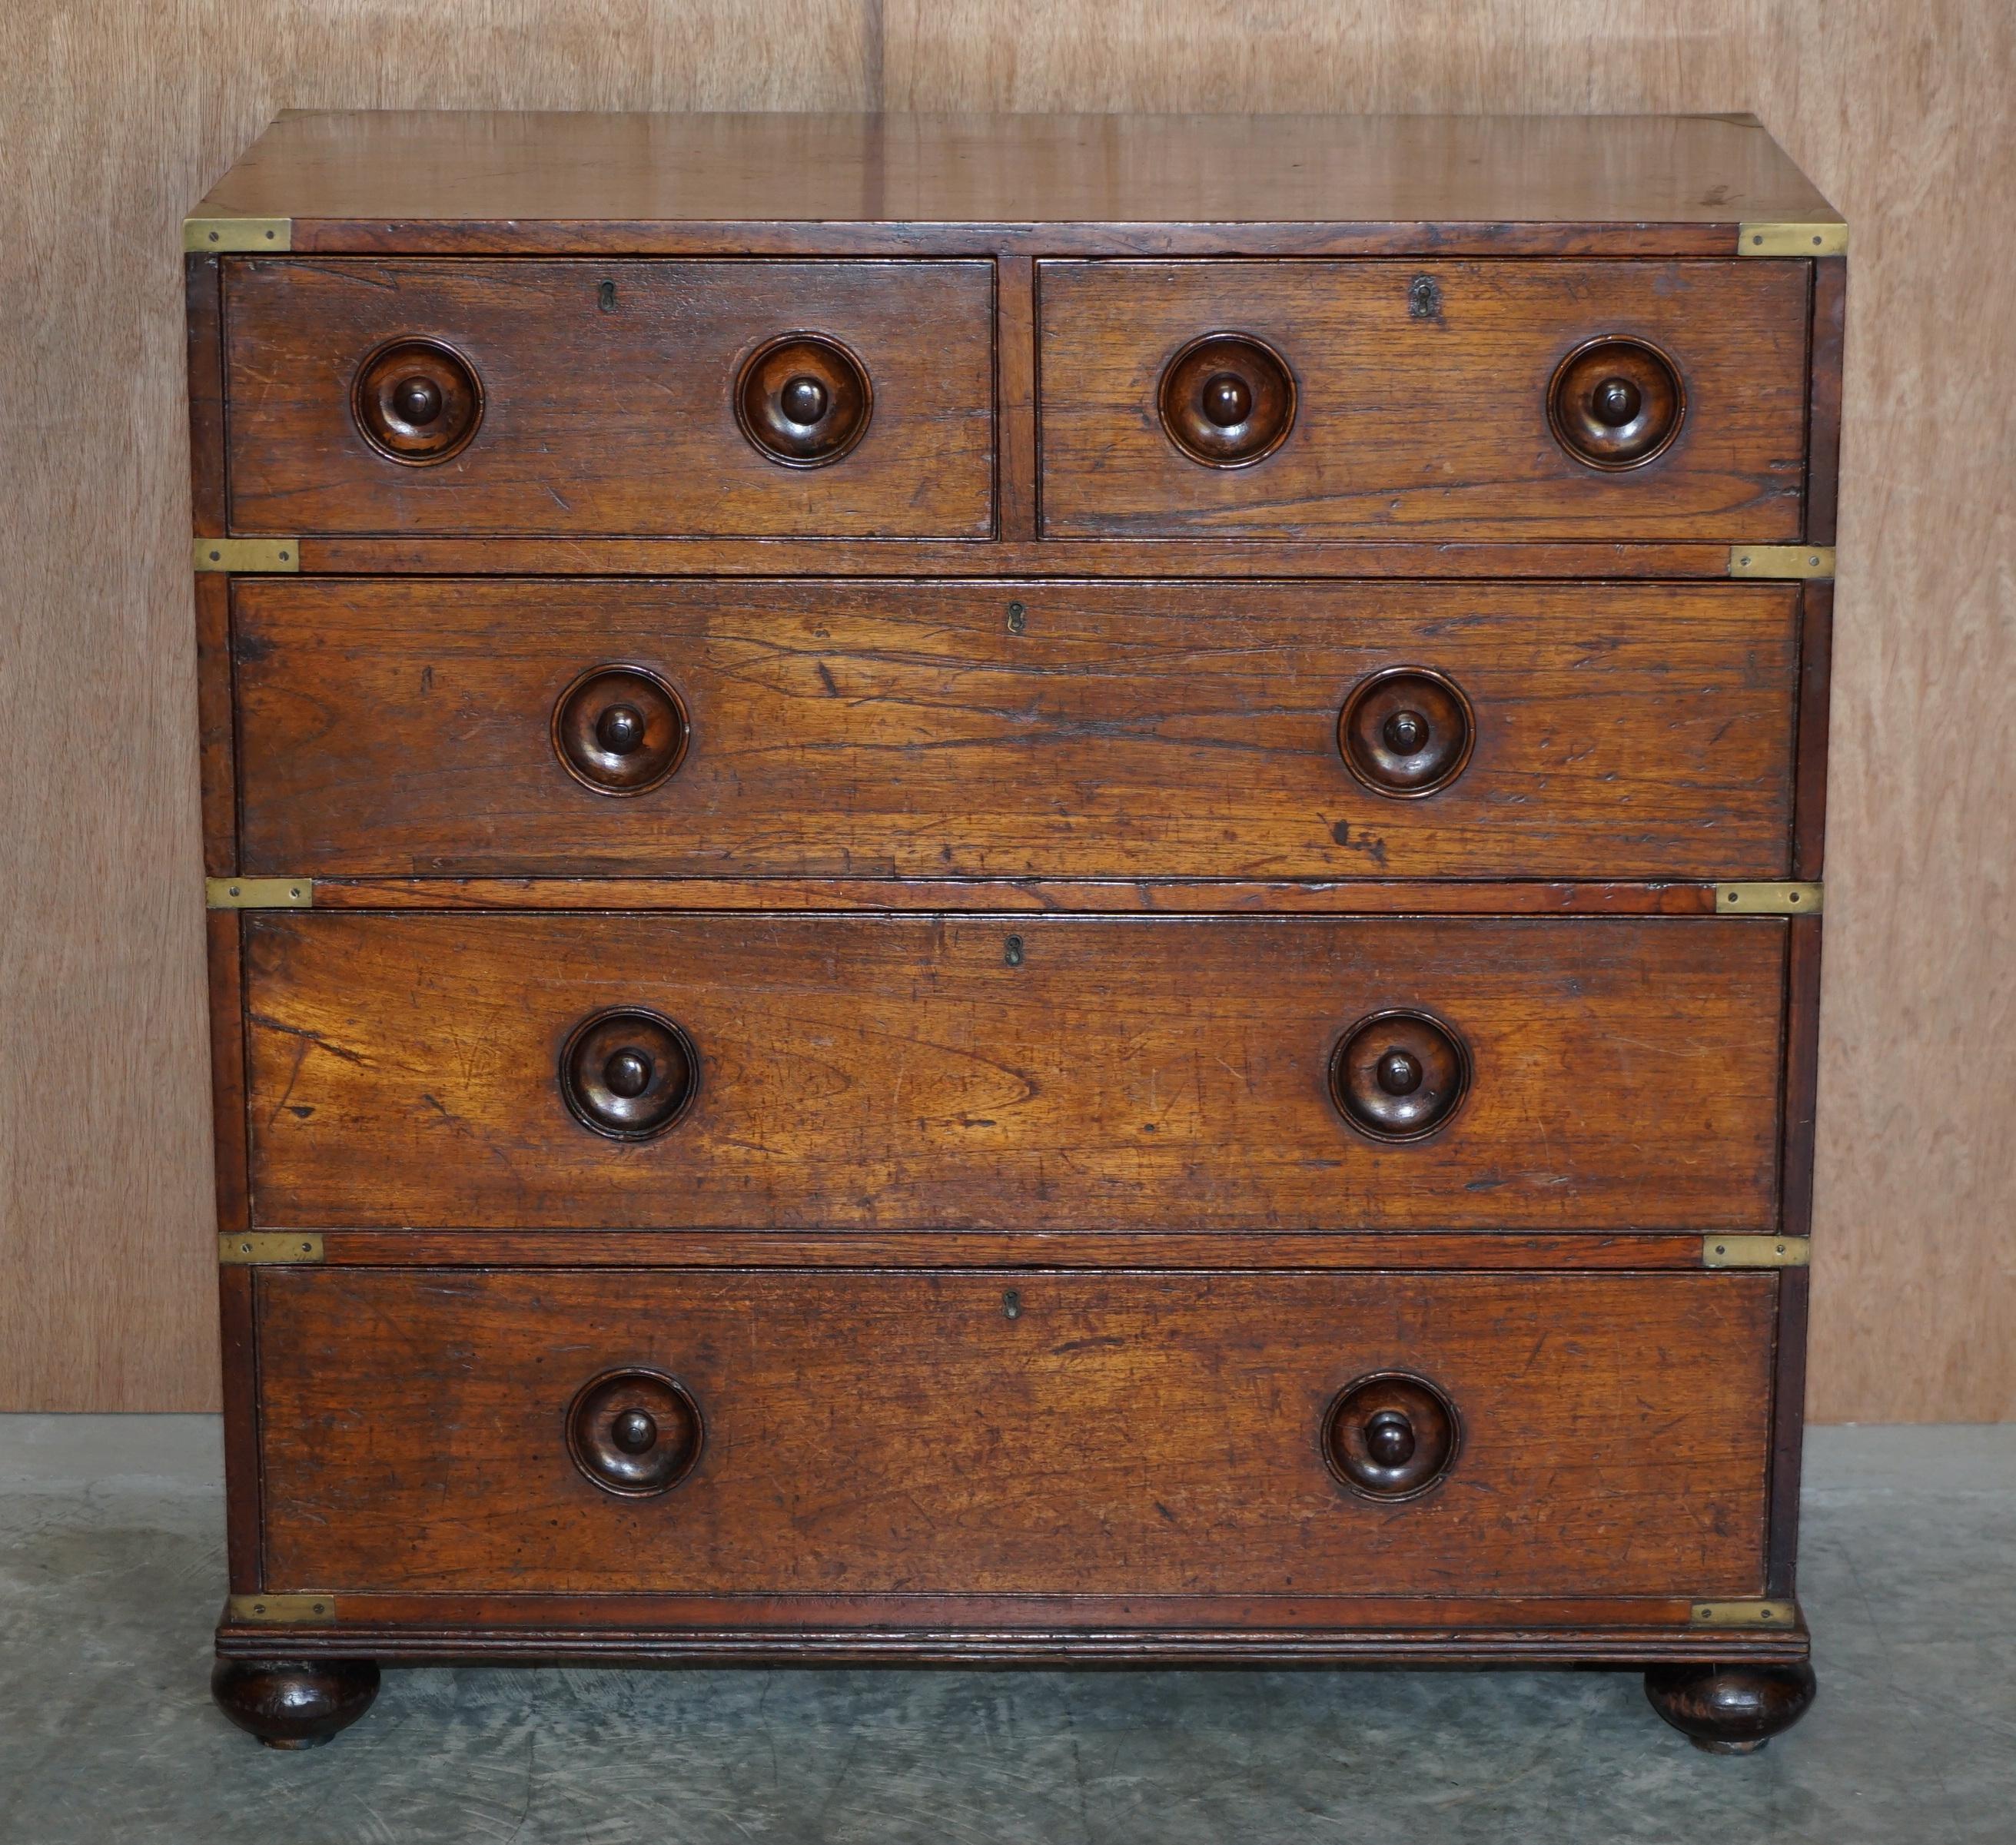 We are delighted to offer for sale this exceptional mid Victorian military Campaign chest of drawers with very rare haberdashery style recessed handles

What a find, this is the earliest Campaign trunk I have ever owned, made in the very early